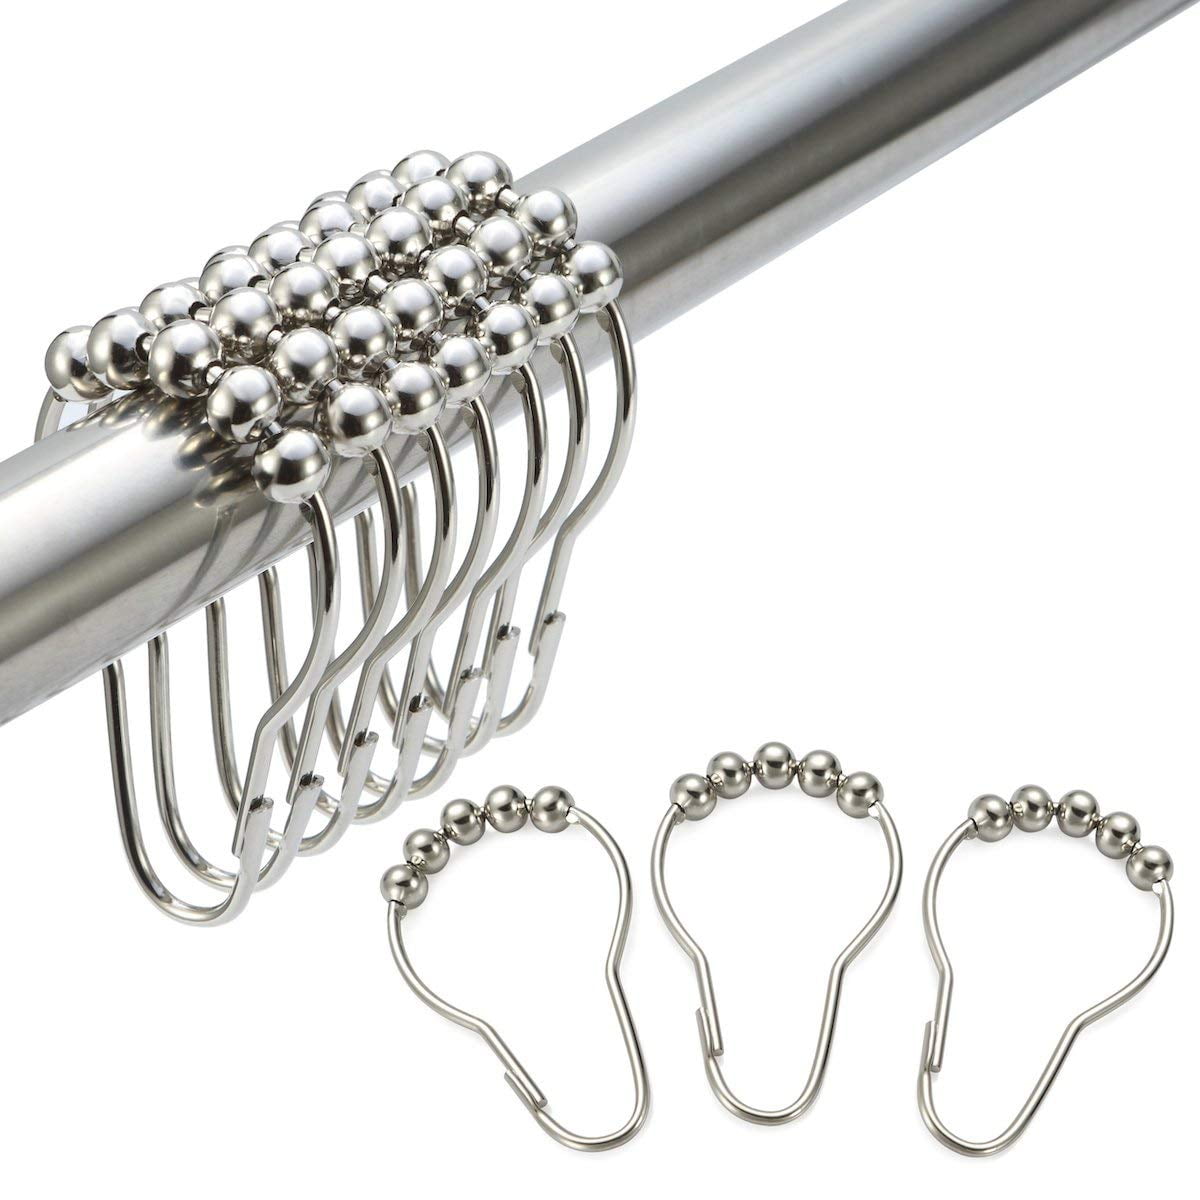 12Pcs Stainless Steel Rust Proof Shower Curtain Hooks Free Gliding Rings Kit 